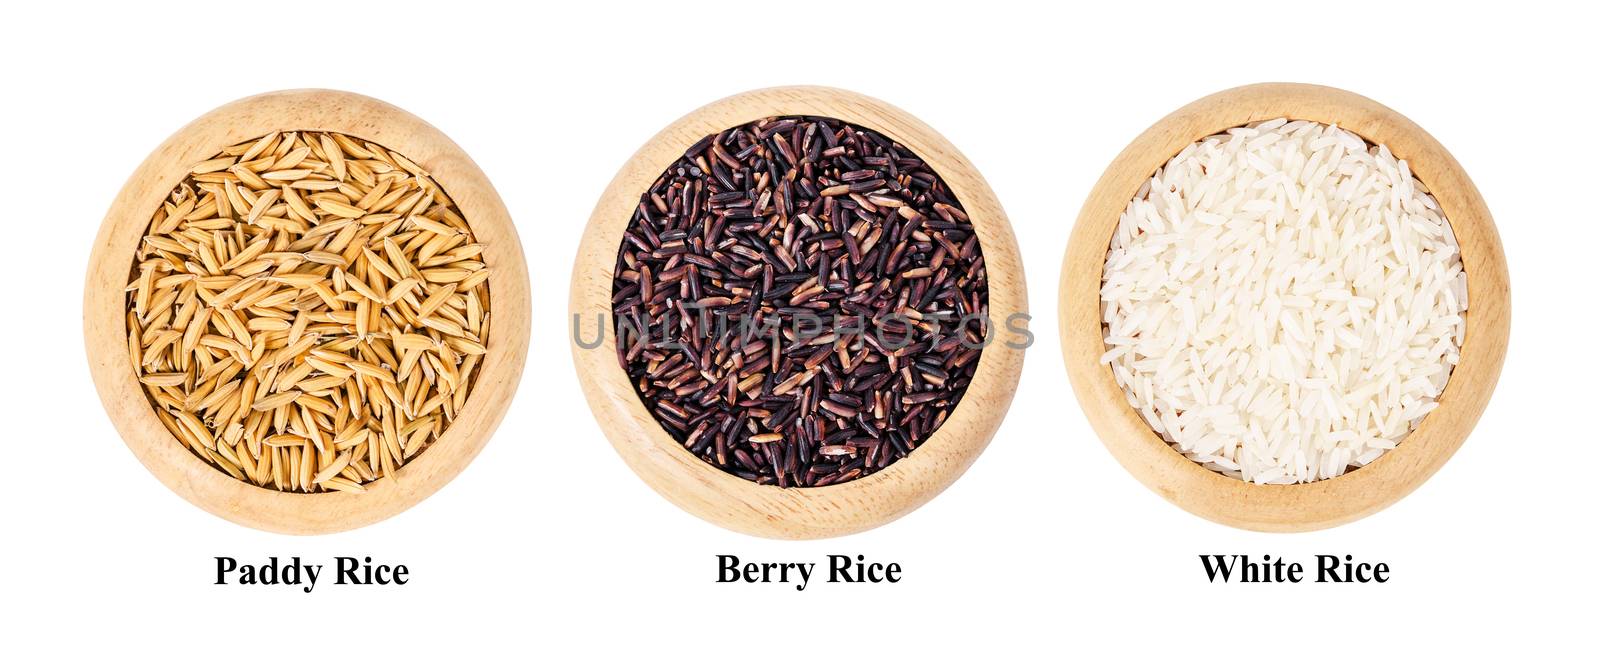 Different of berry rice, Paddy, and white rice in wooden dish by Gamjai